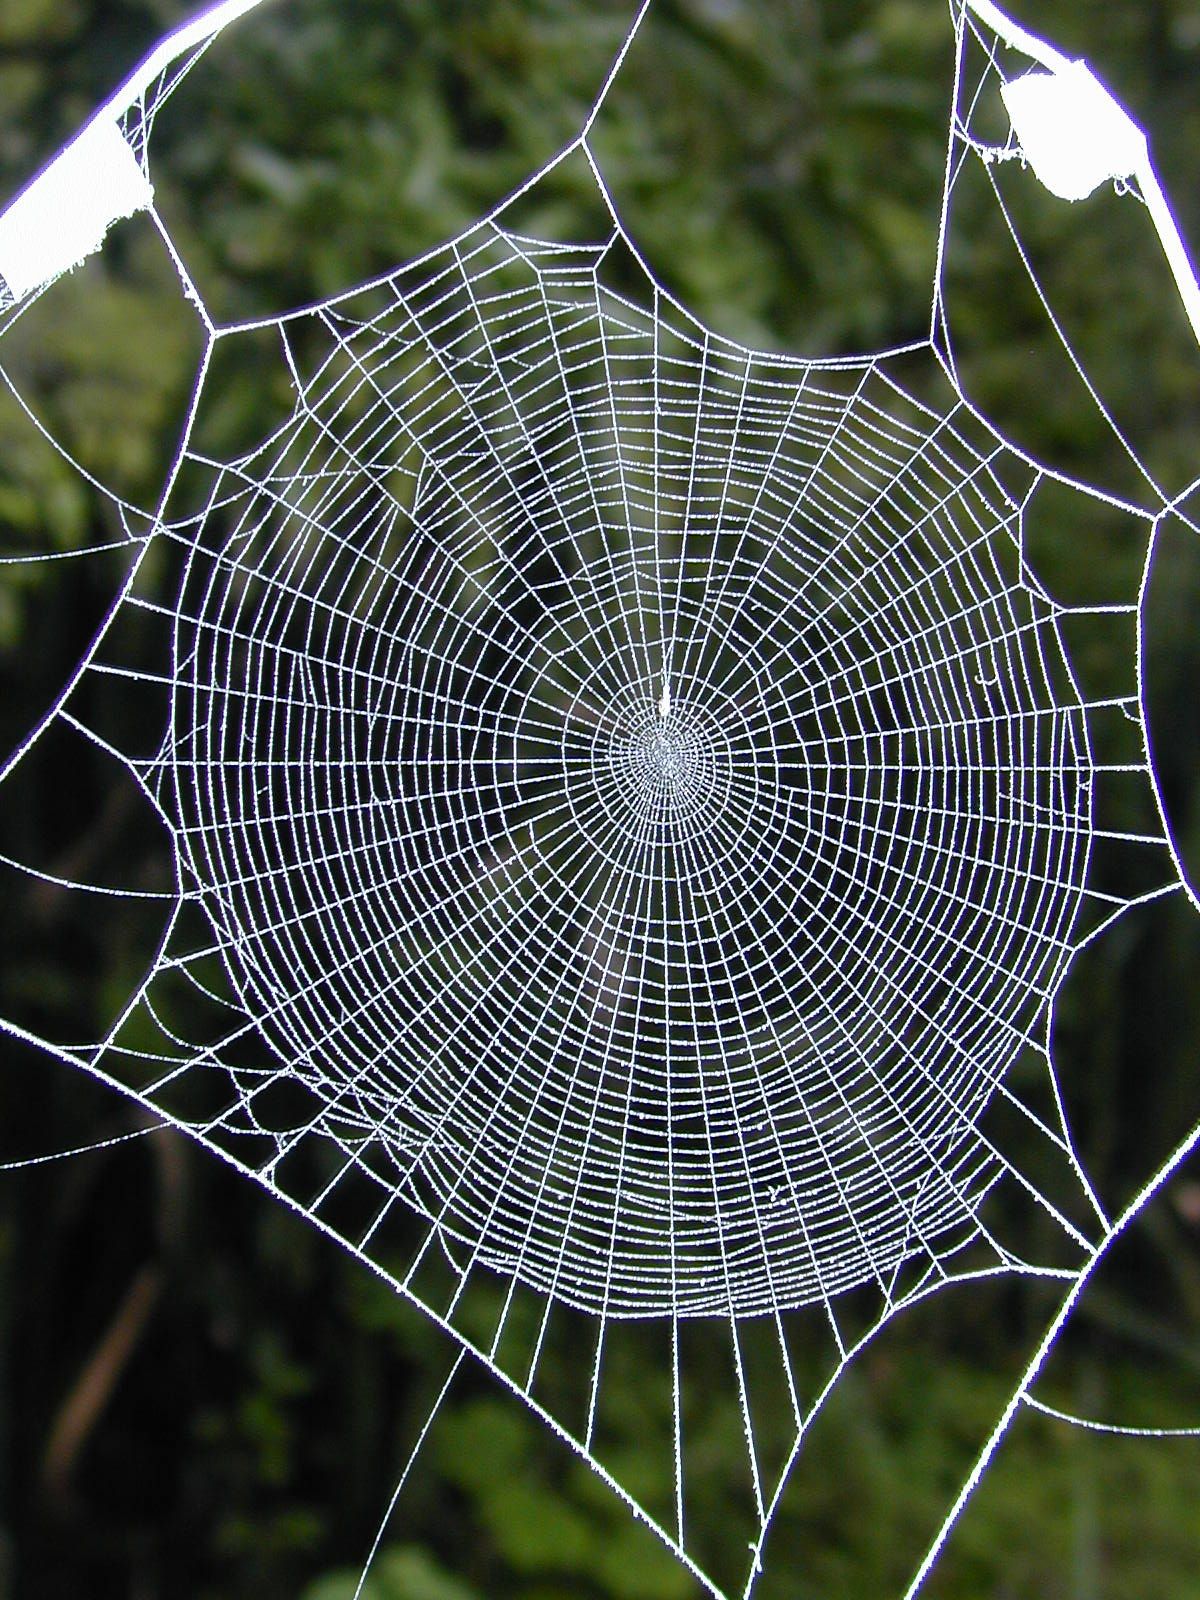 spider webs | Drugged spiders' web spinning may hold keys to ...